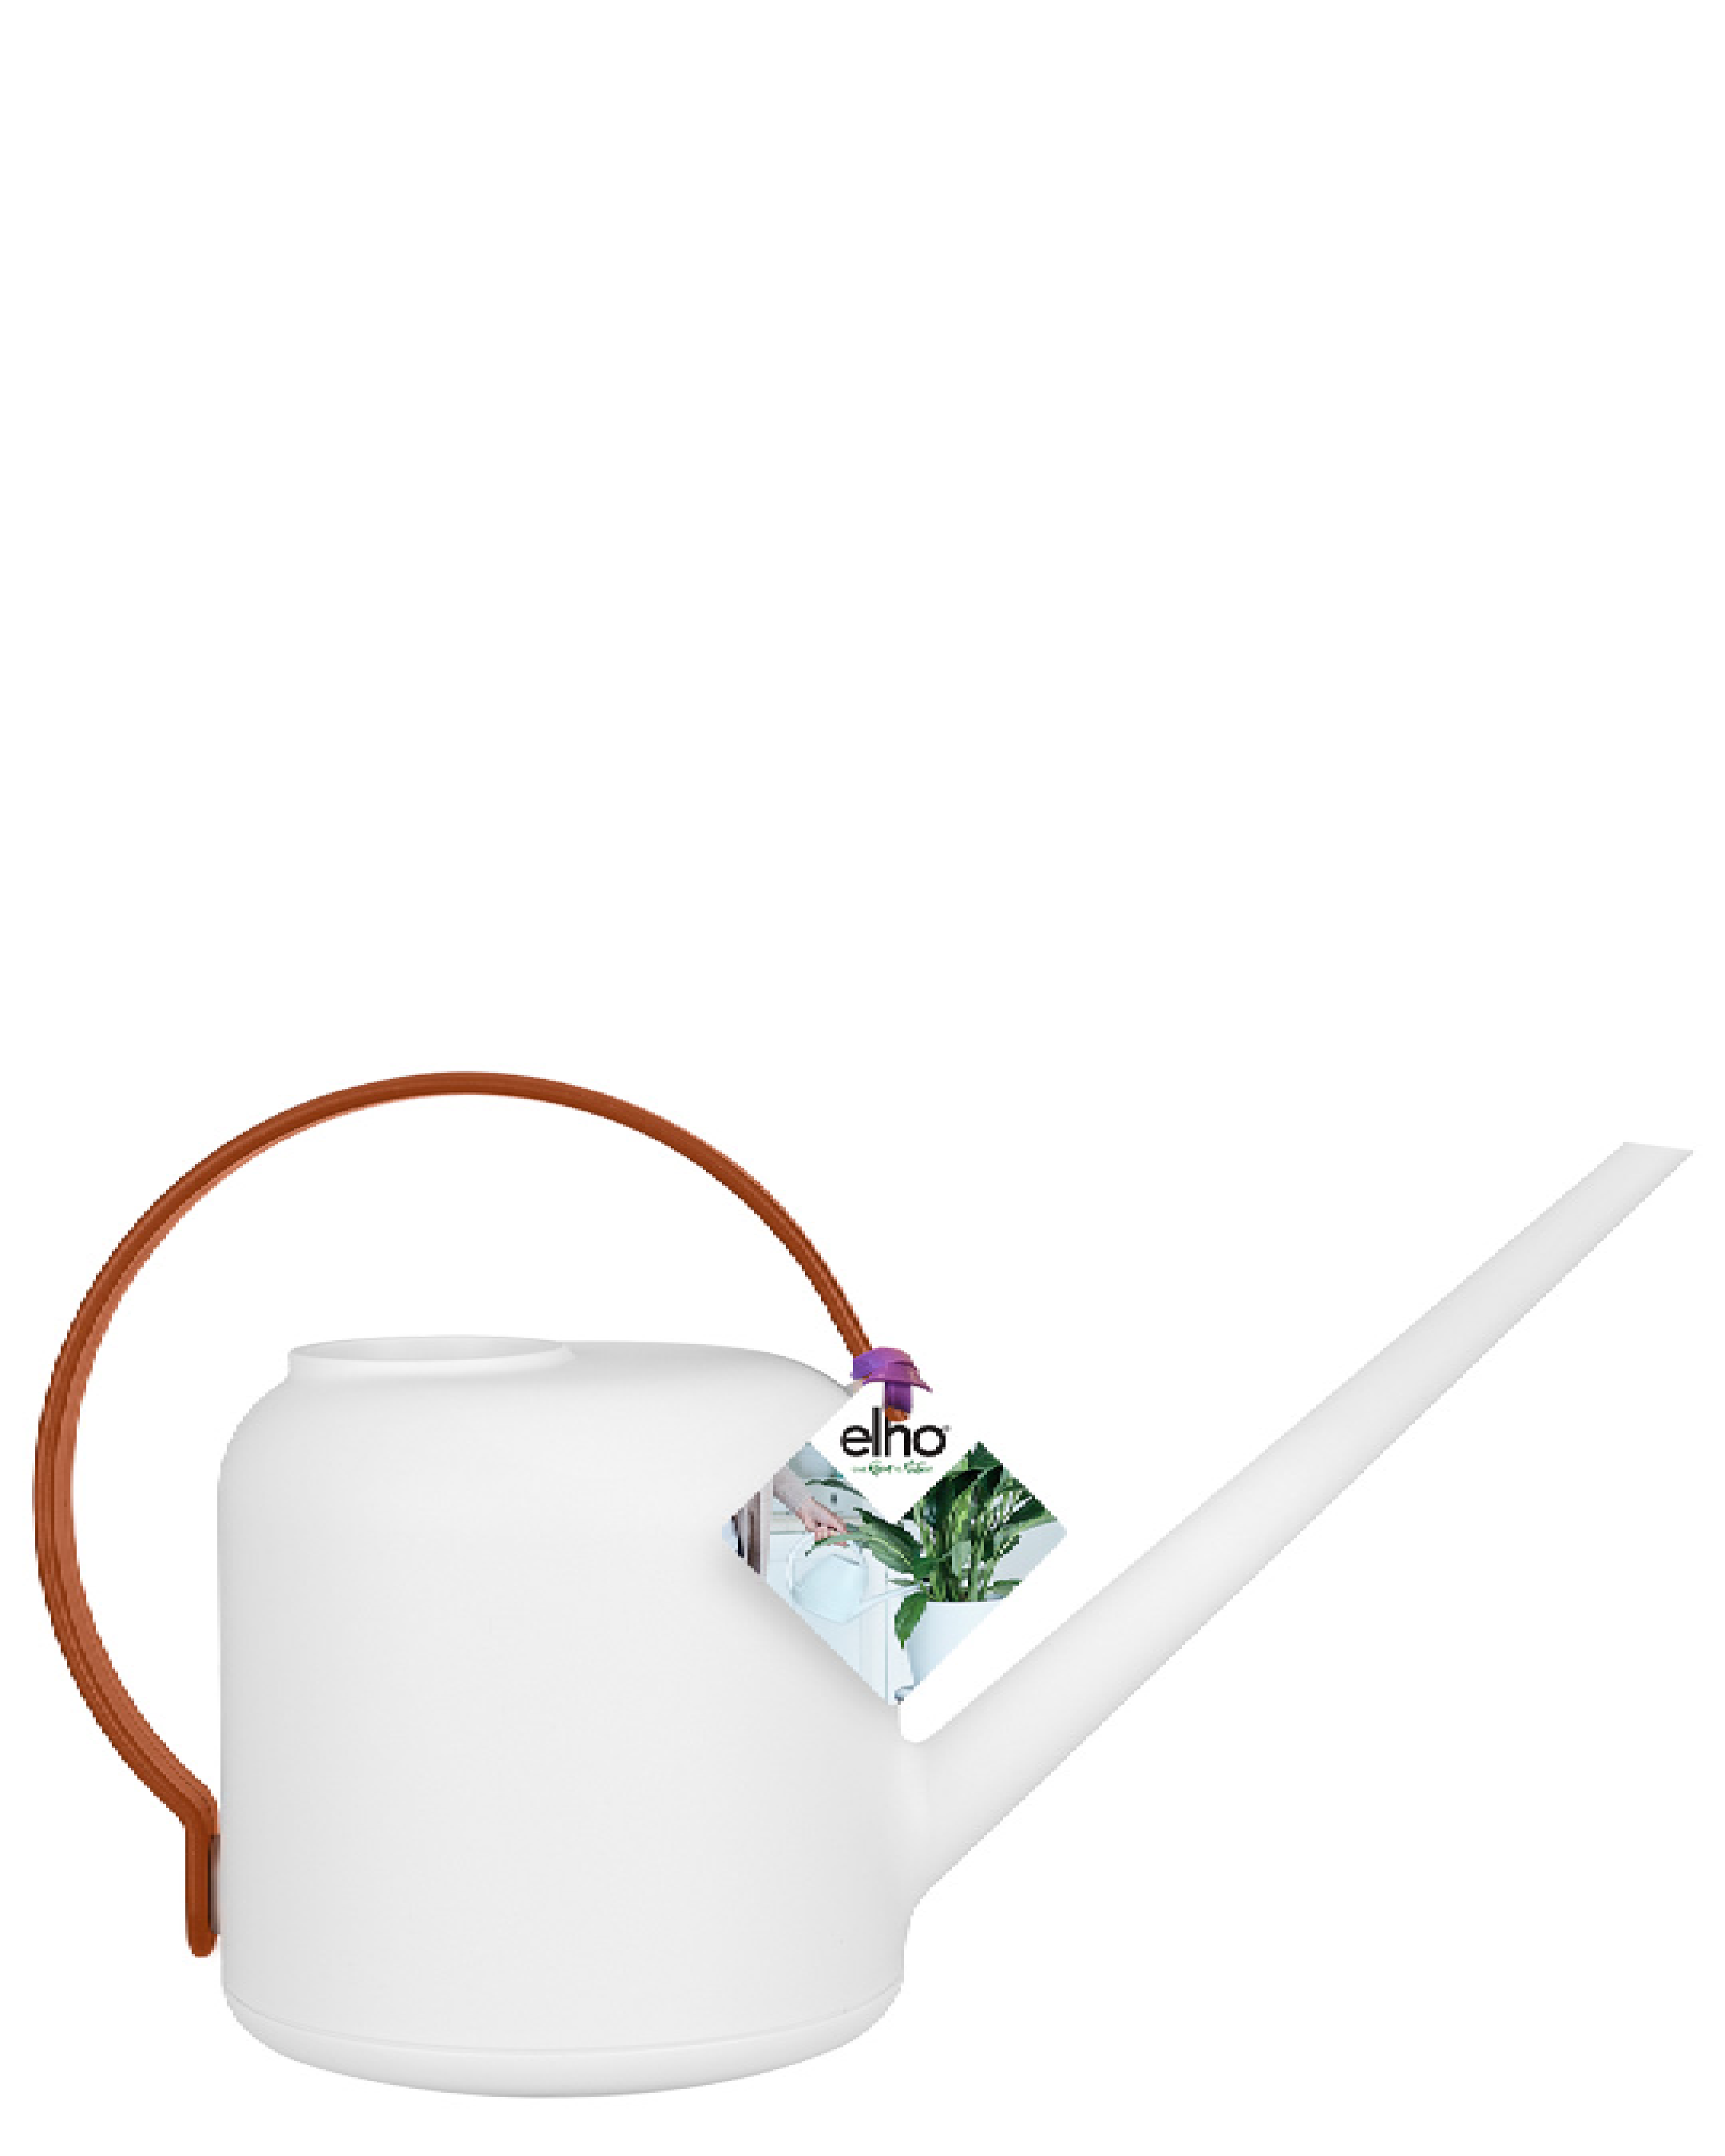 B. For Watering Can